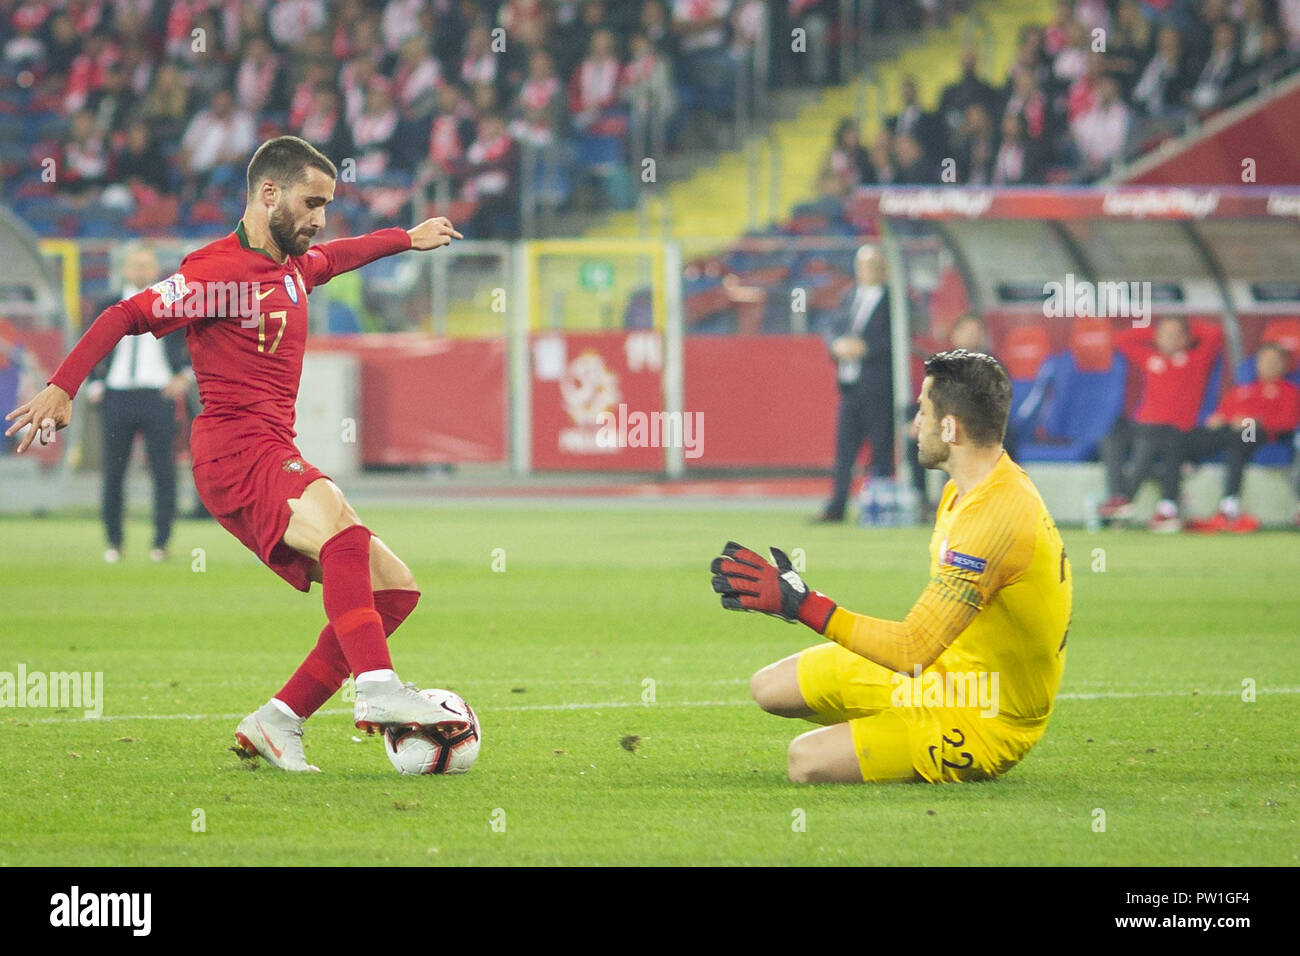 Katowice, Poland. 11th Oct, 2018. Portugal's player Rafa Silva in action during the match between Poland and Portugal for the UEFA Nations League, at Slaski Stadium, in ChorzÃ³w, Poland.Final Score: Poland 2-3 Portugal Credit: Diogo Baptista/SOPA Images/ZUMA Wire/Alamy Live News Stock Photo